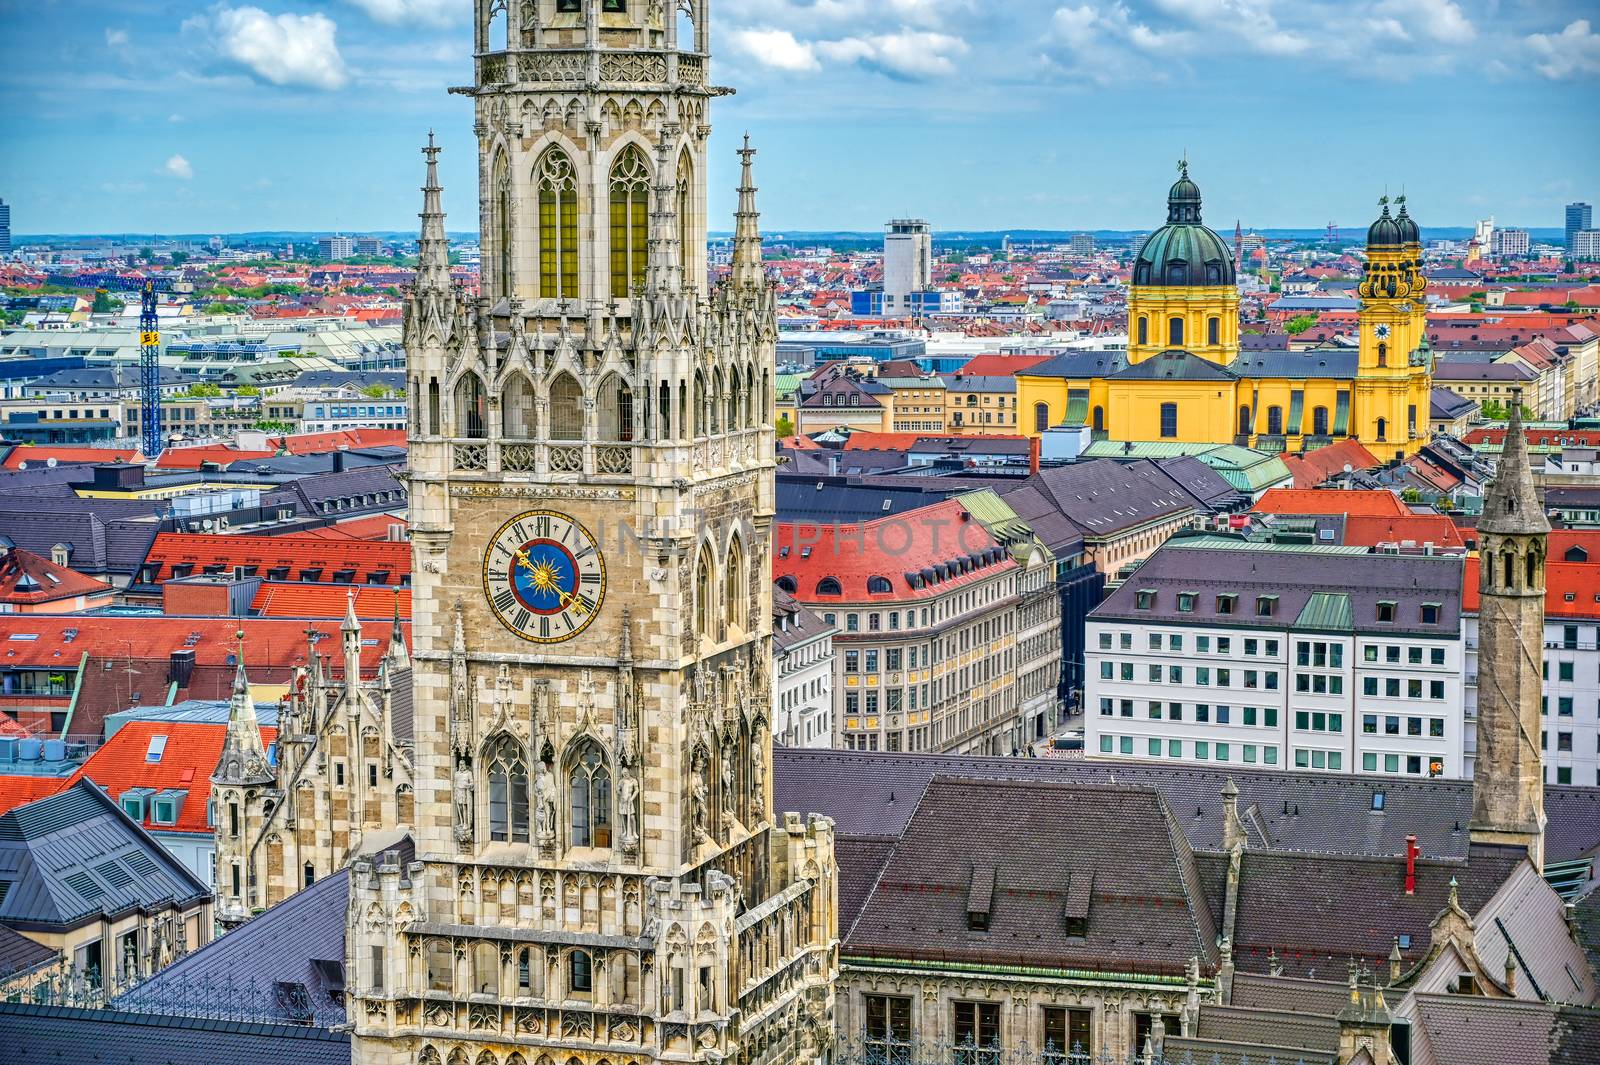 The New Town Hall located in the Marienplatz in Munich, Germany